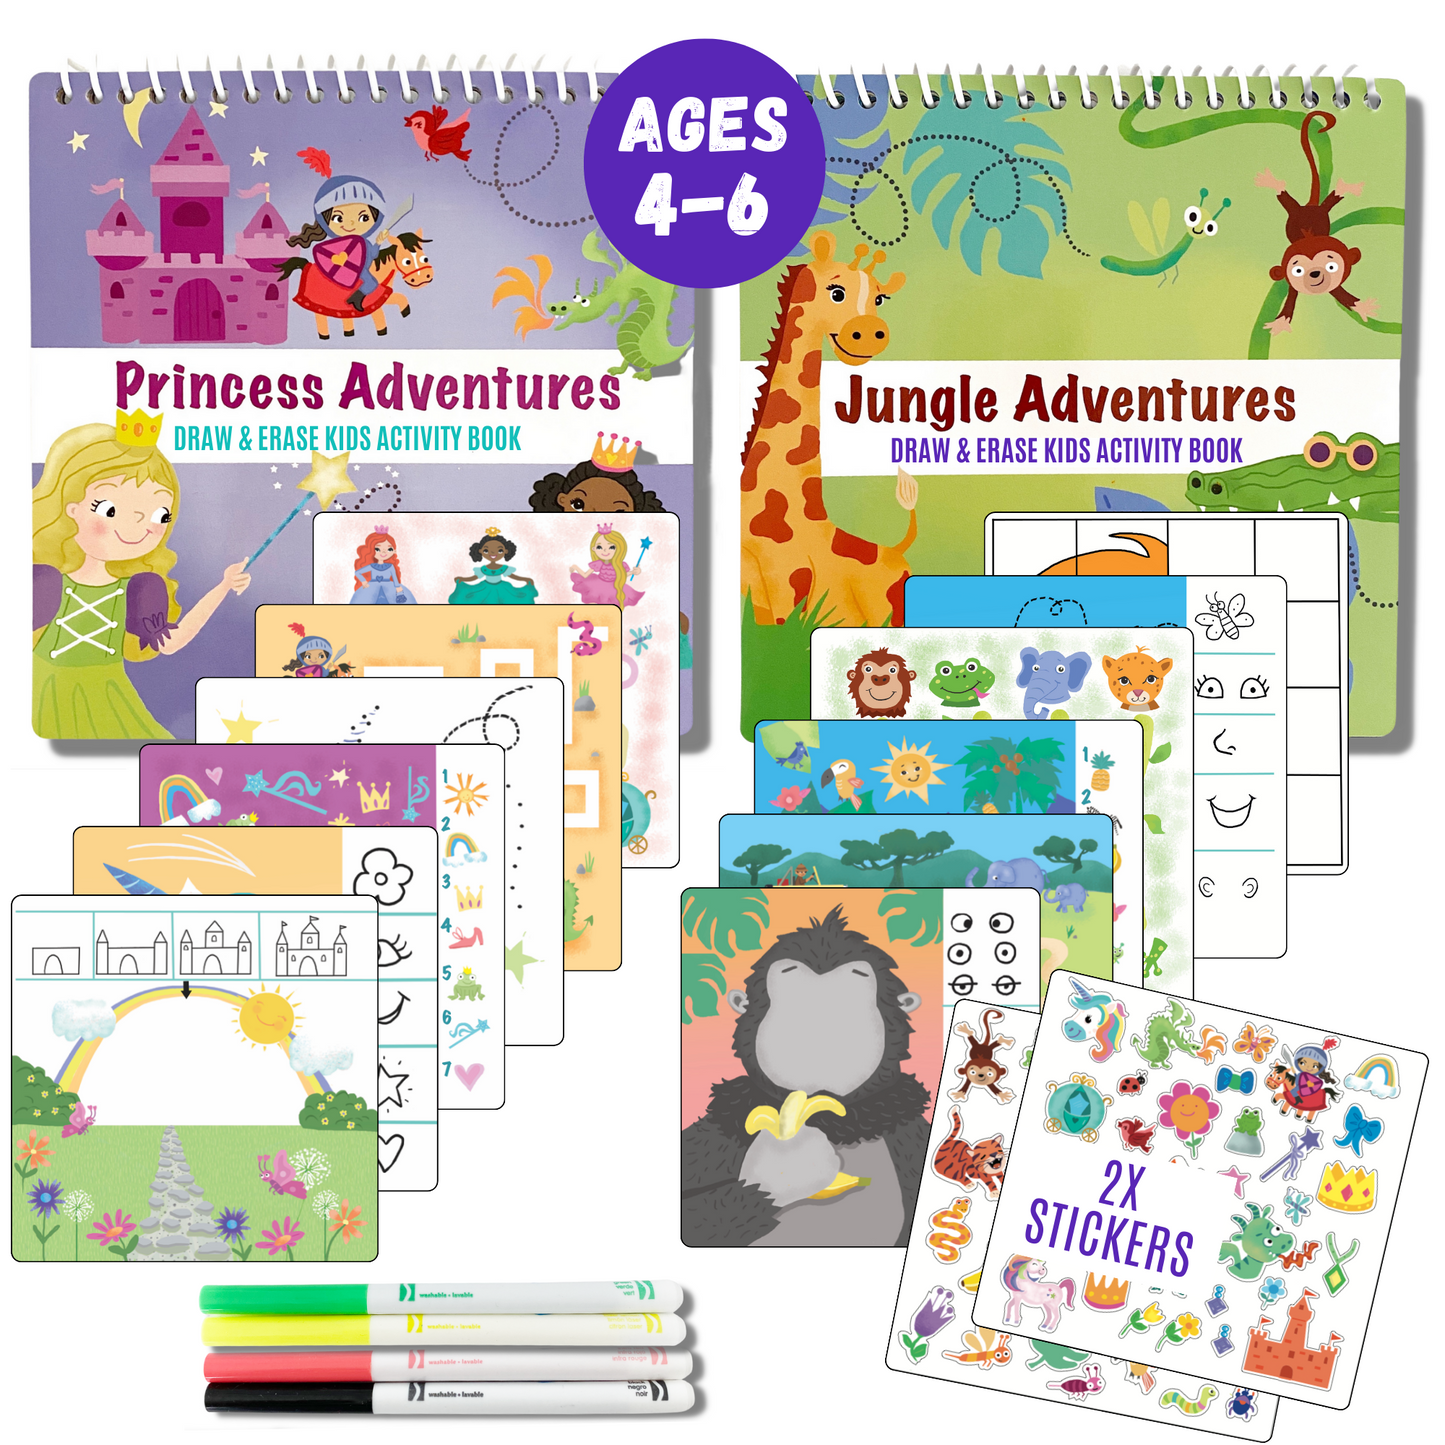 Totebook Kids Travel Educational Activity Book with Washable Markers - Car and Airplane Activities, Learning Toys for Toddlers- Search and Find, Reusable Stickers for Ages 4, 5, 6